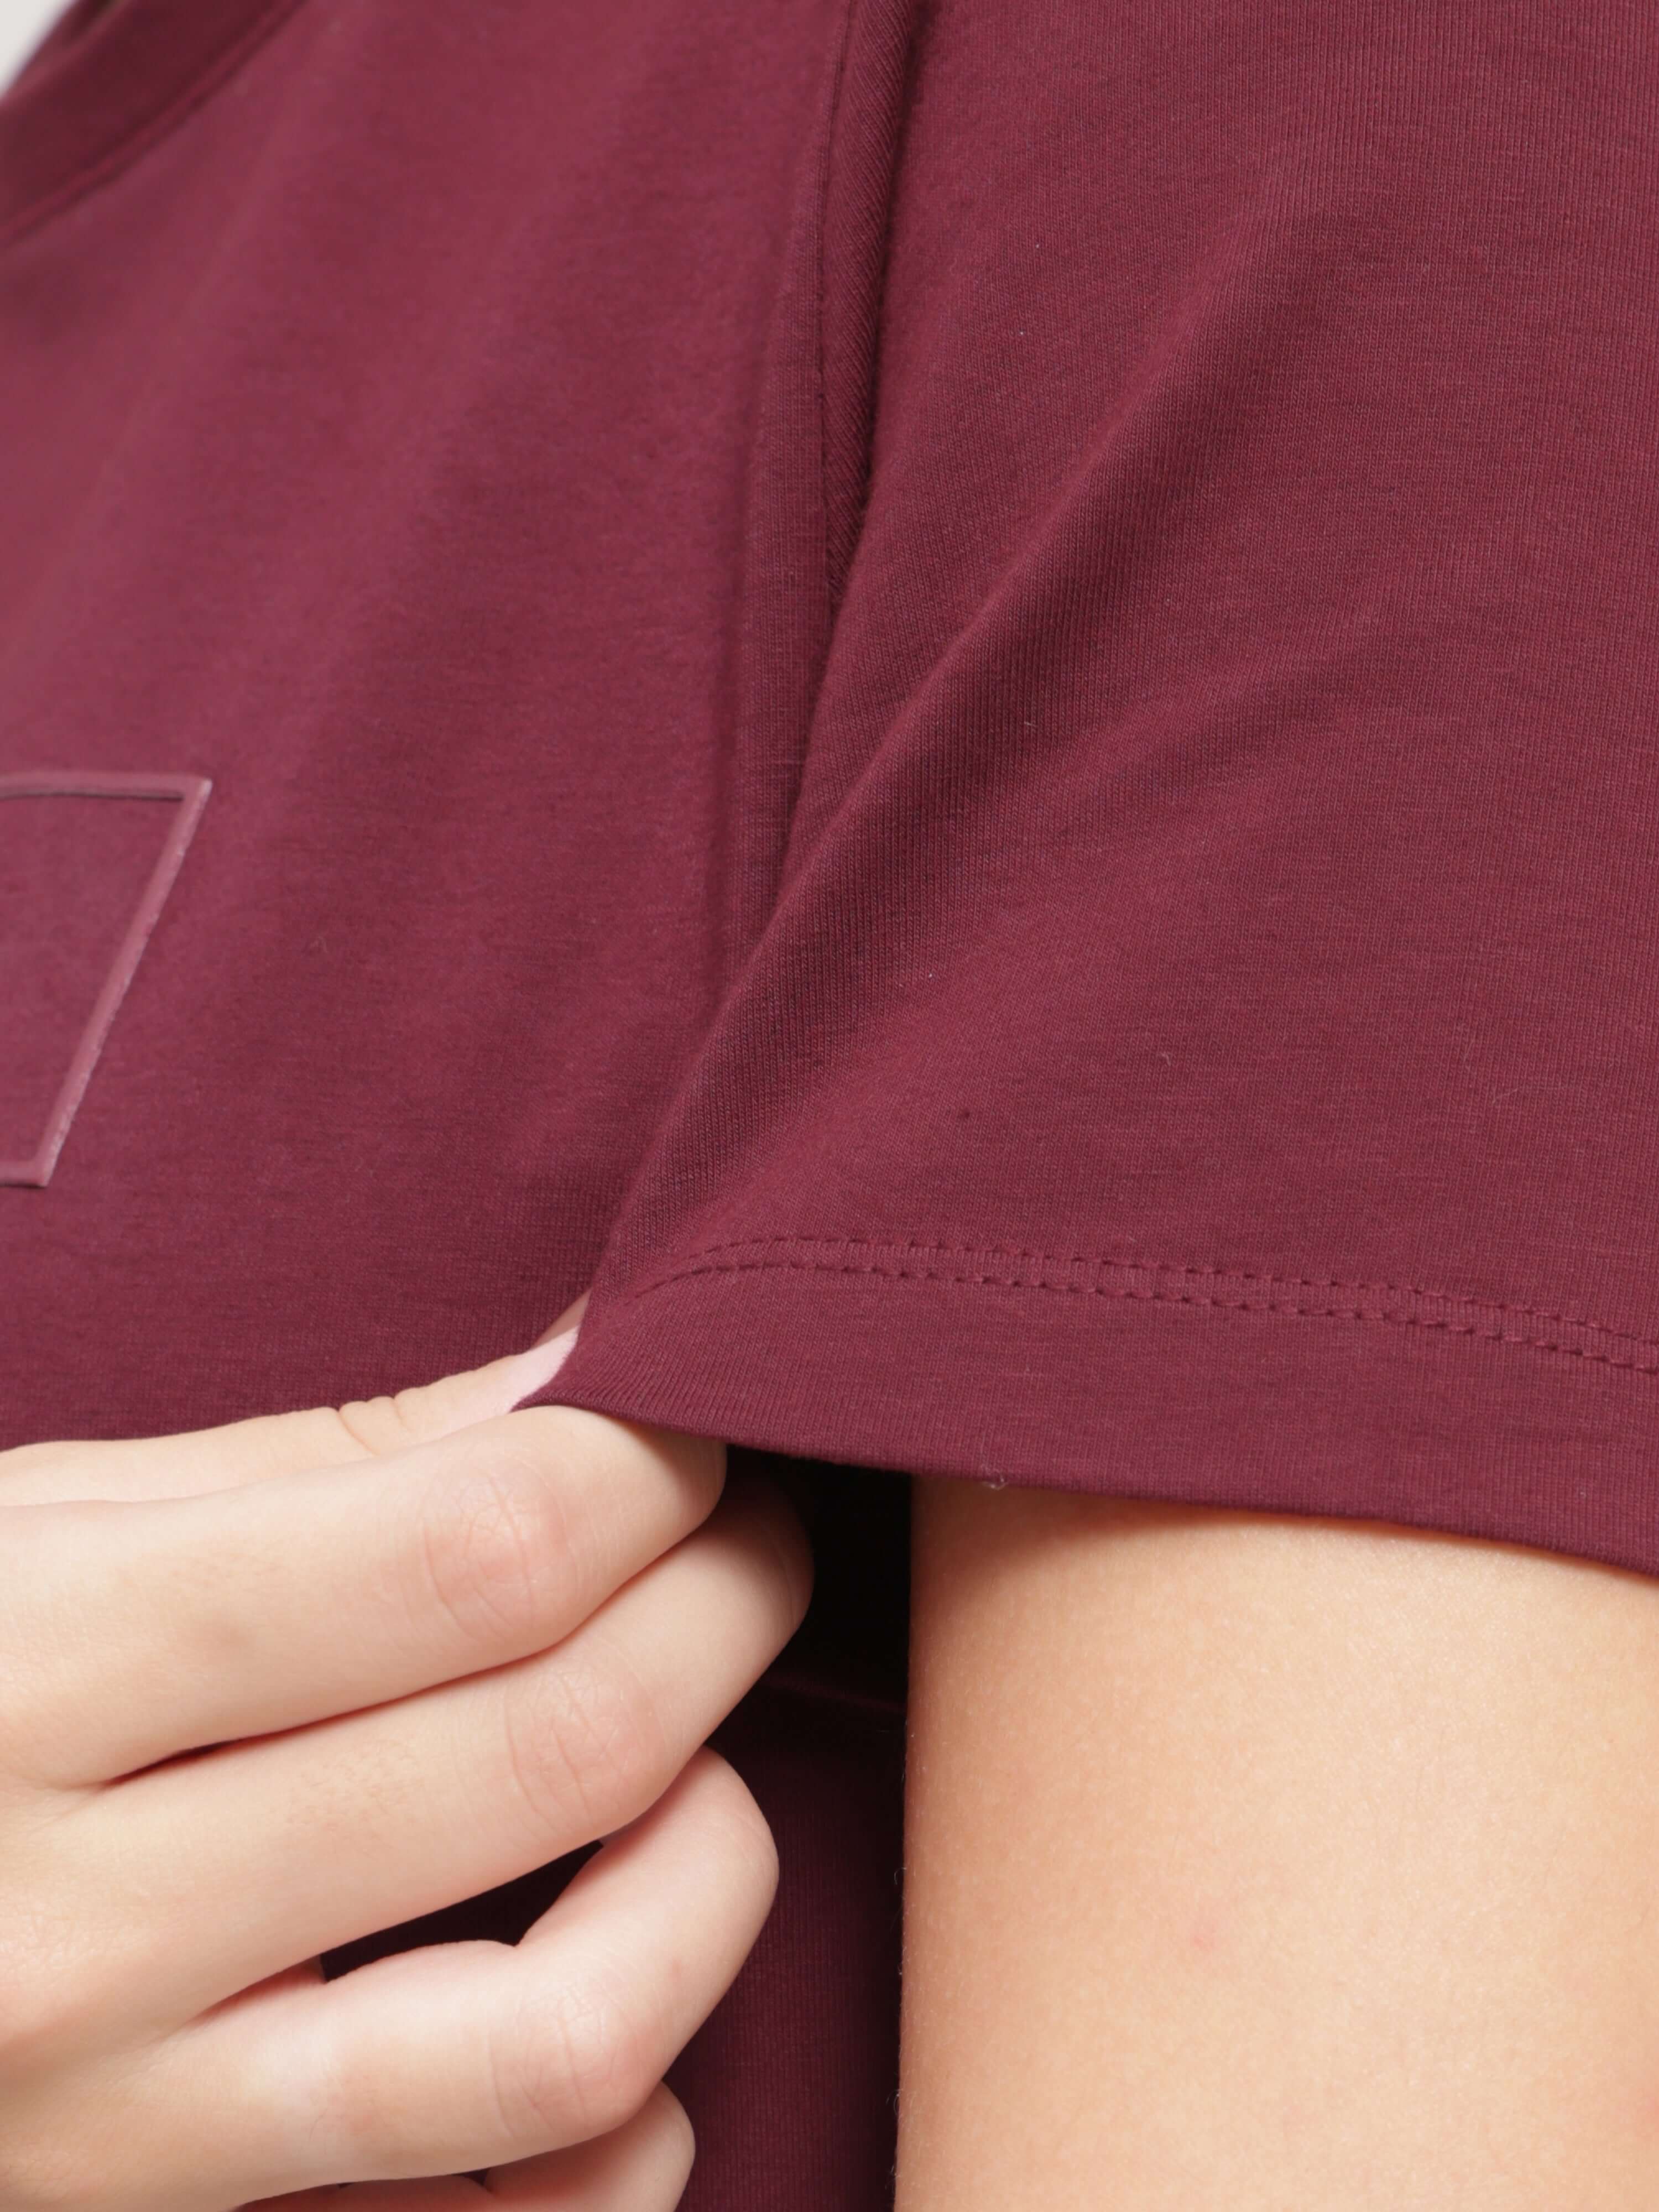 Close-up of Burgundy Elite Turms T-shirt sleeve, anti-stain, anti-odour, stretchable, intelligent apparel for women, tailored fit, premium cotton